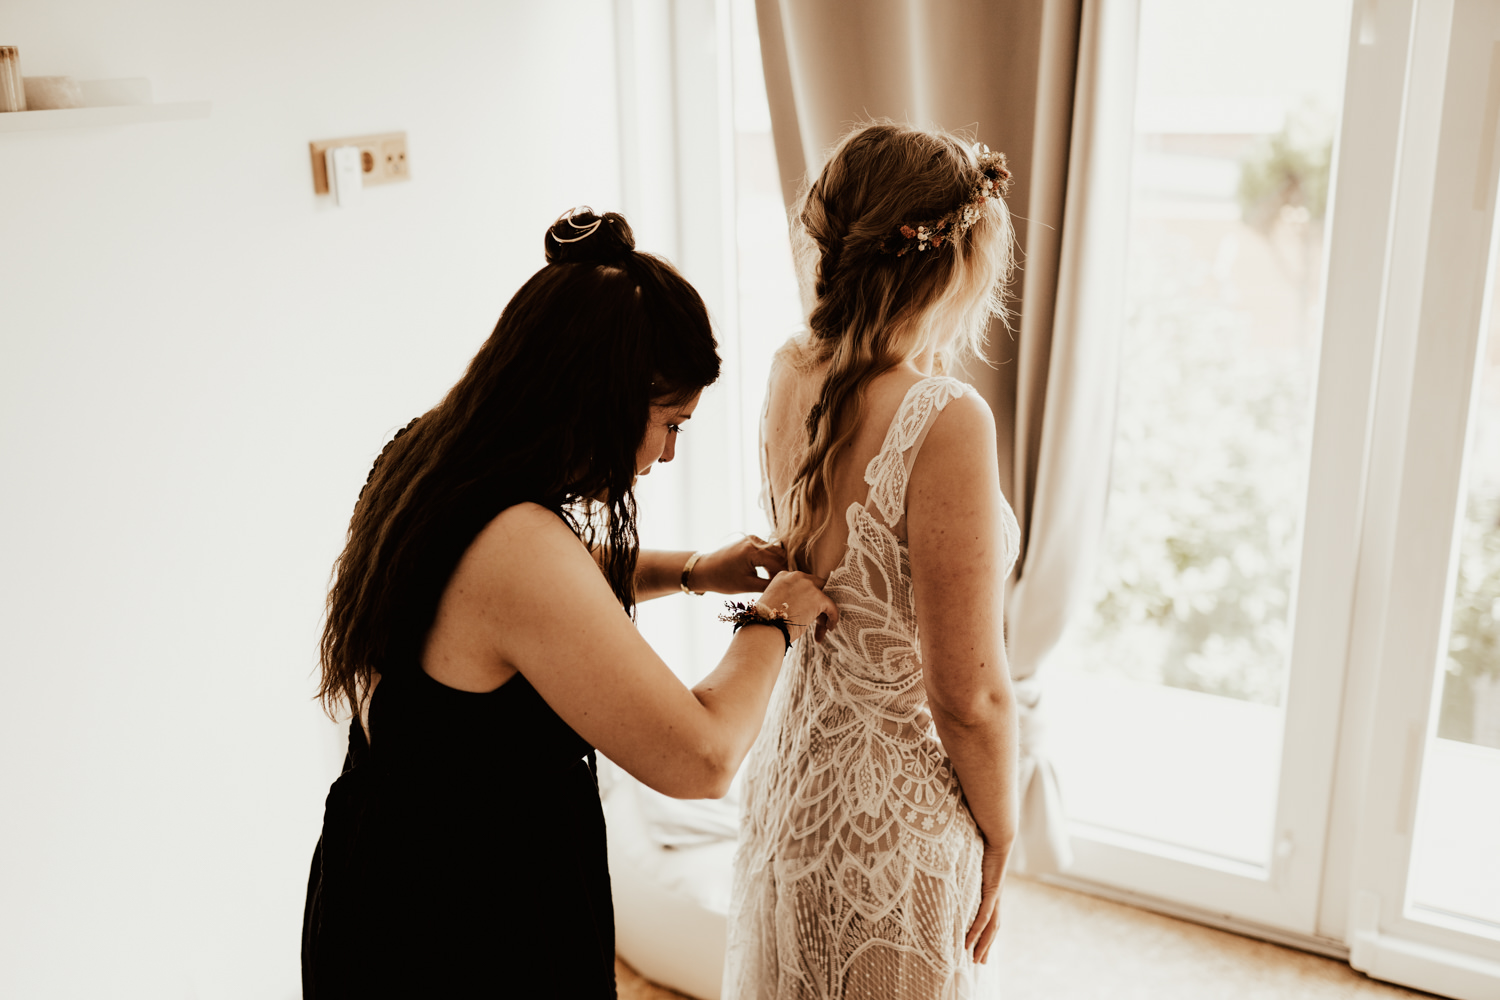 Bride standing faced to the window while bridesmaid buttons her lace boho dress before the wedding